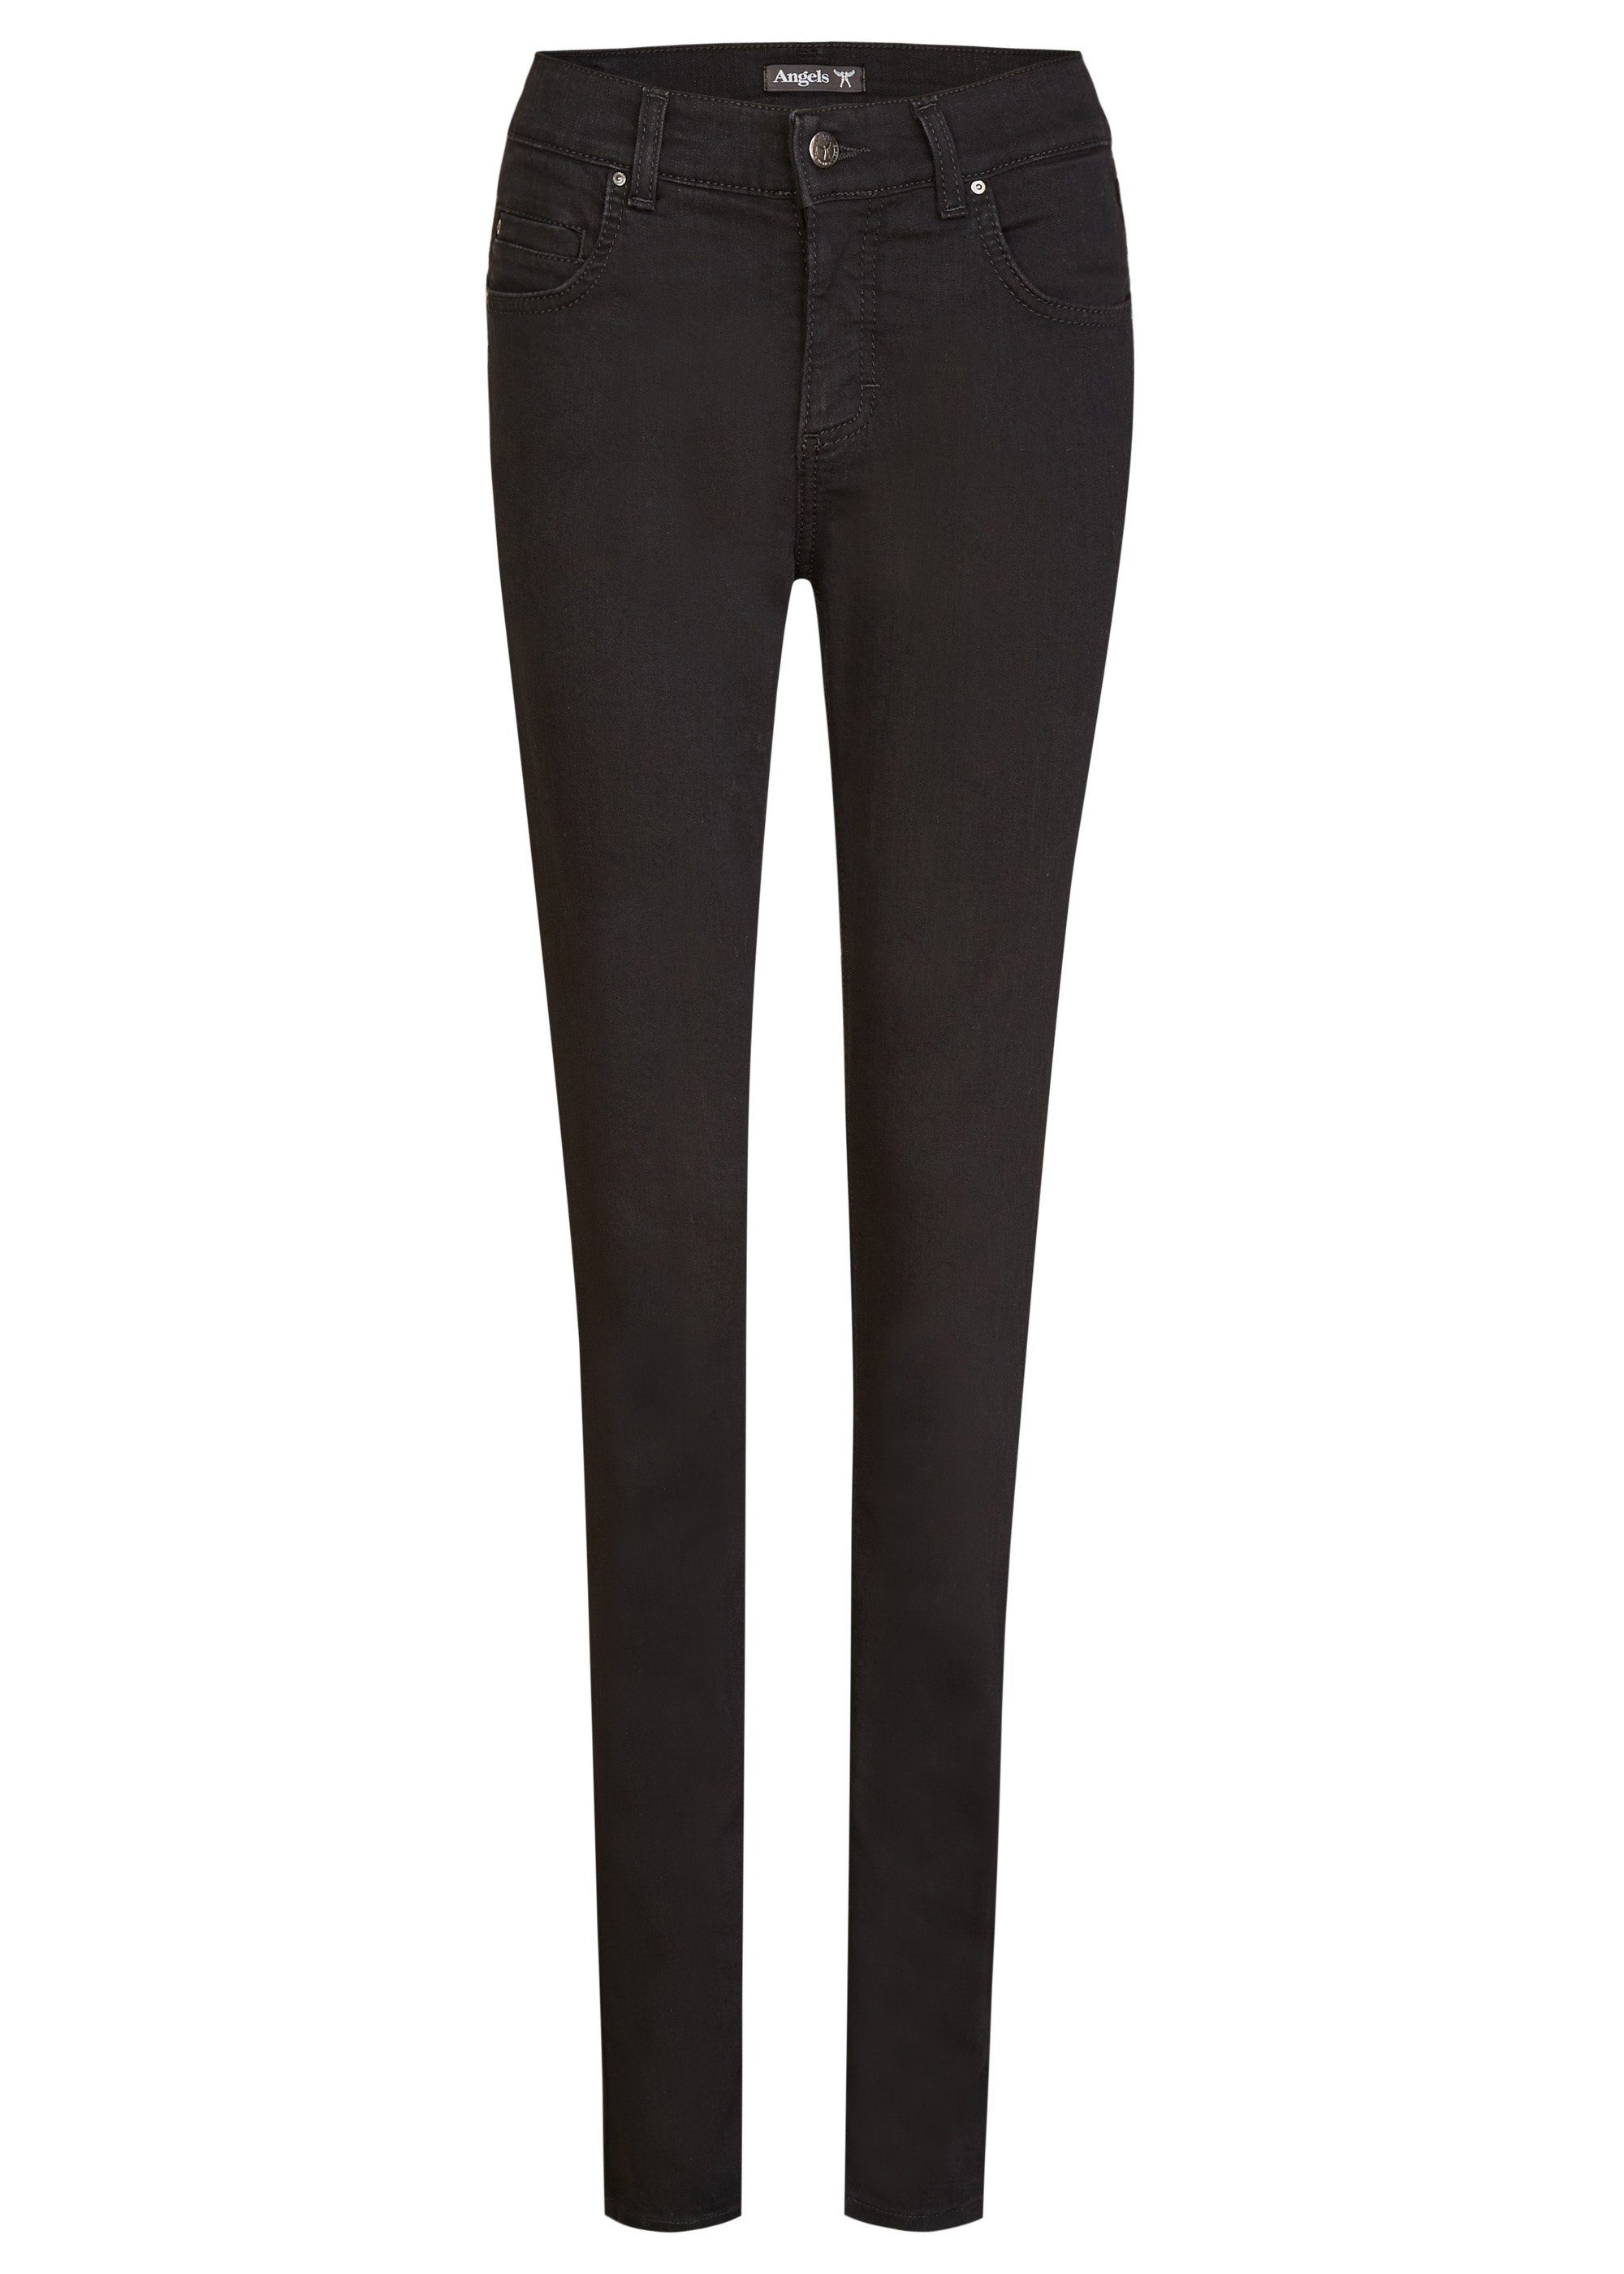 34.100 CICI ANGELS JEANS jetblack ANGELS 74 Stretch-Jeans